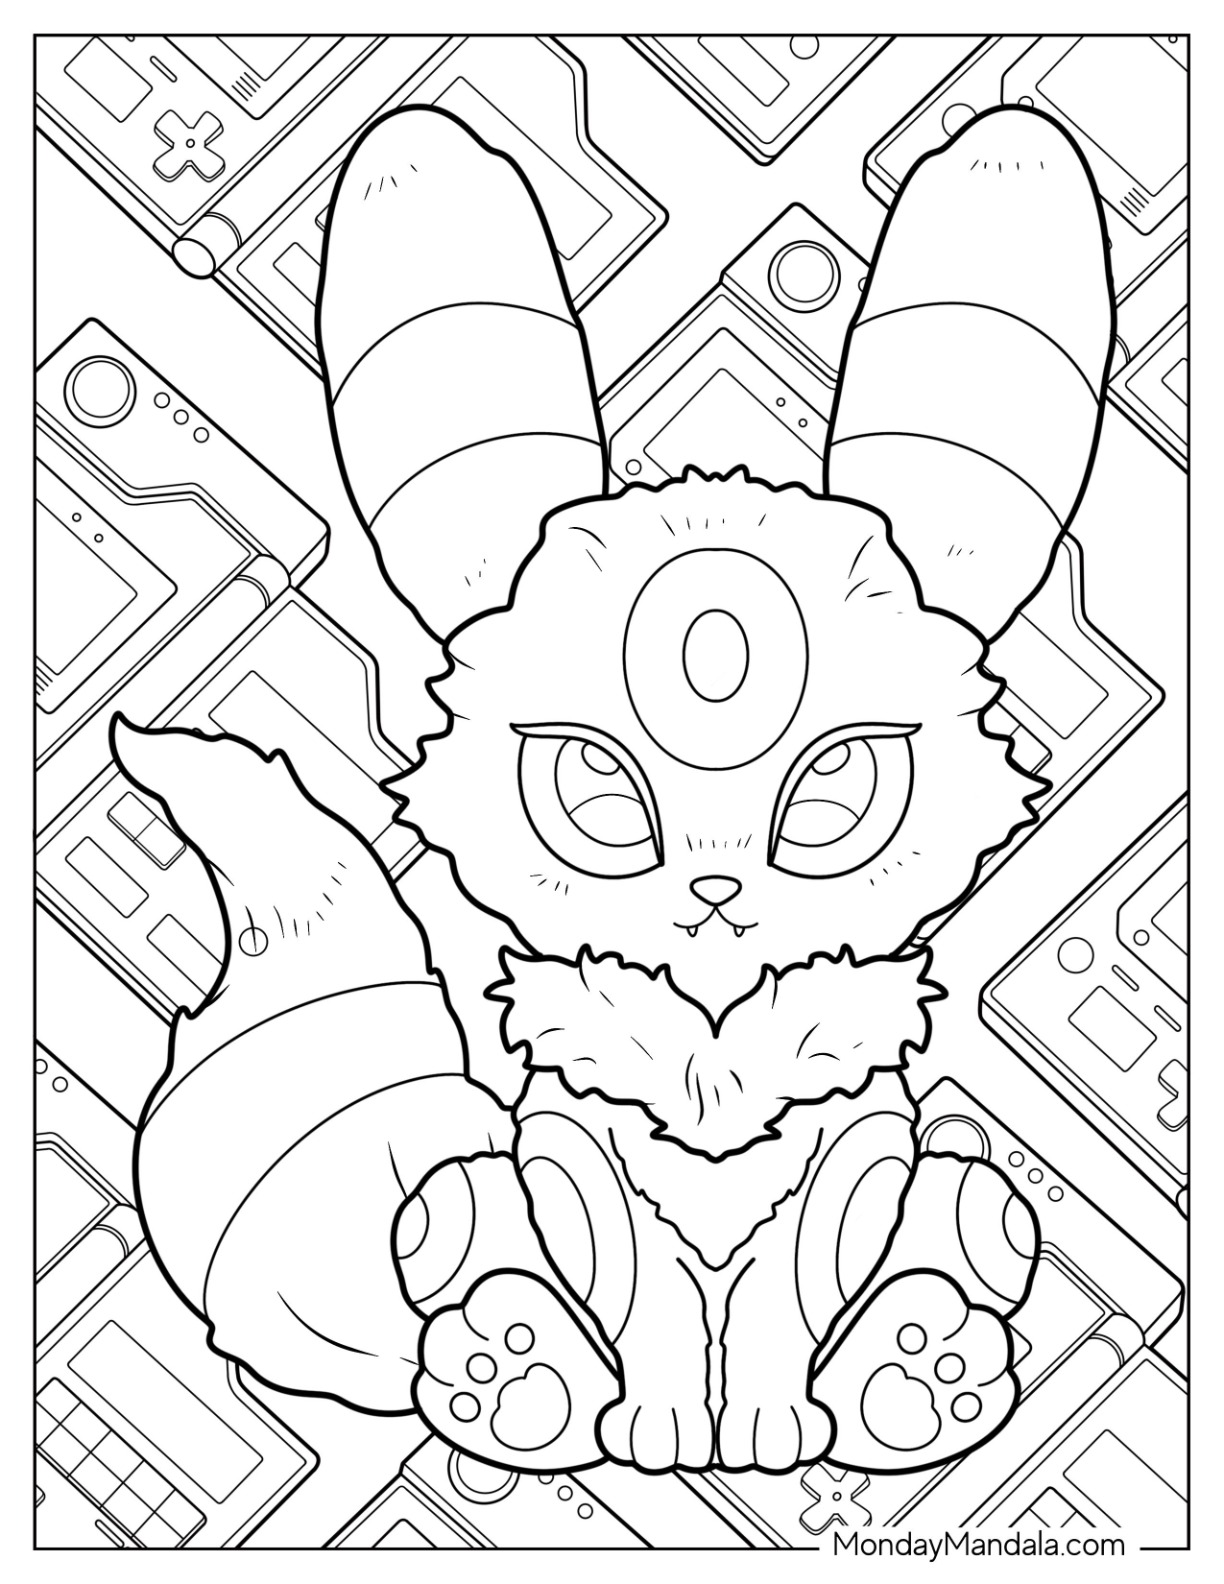 Umbreon coloring pages free pdf printables